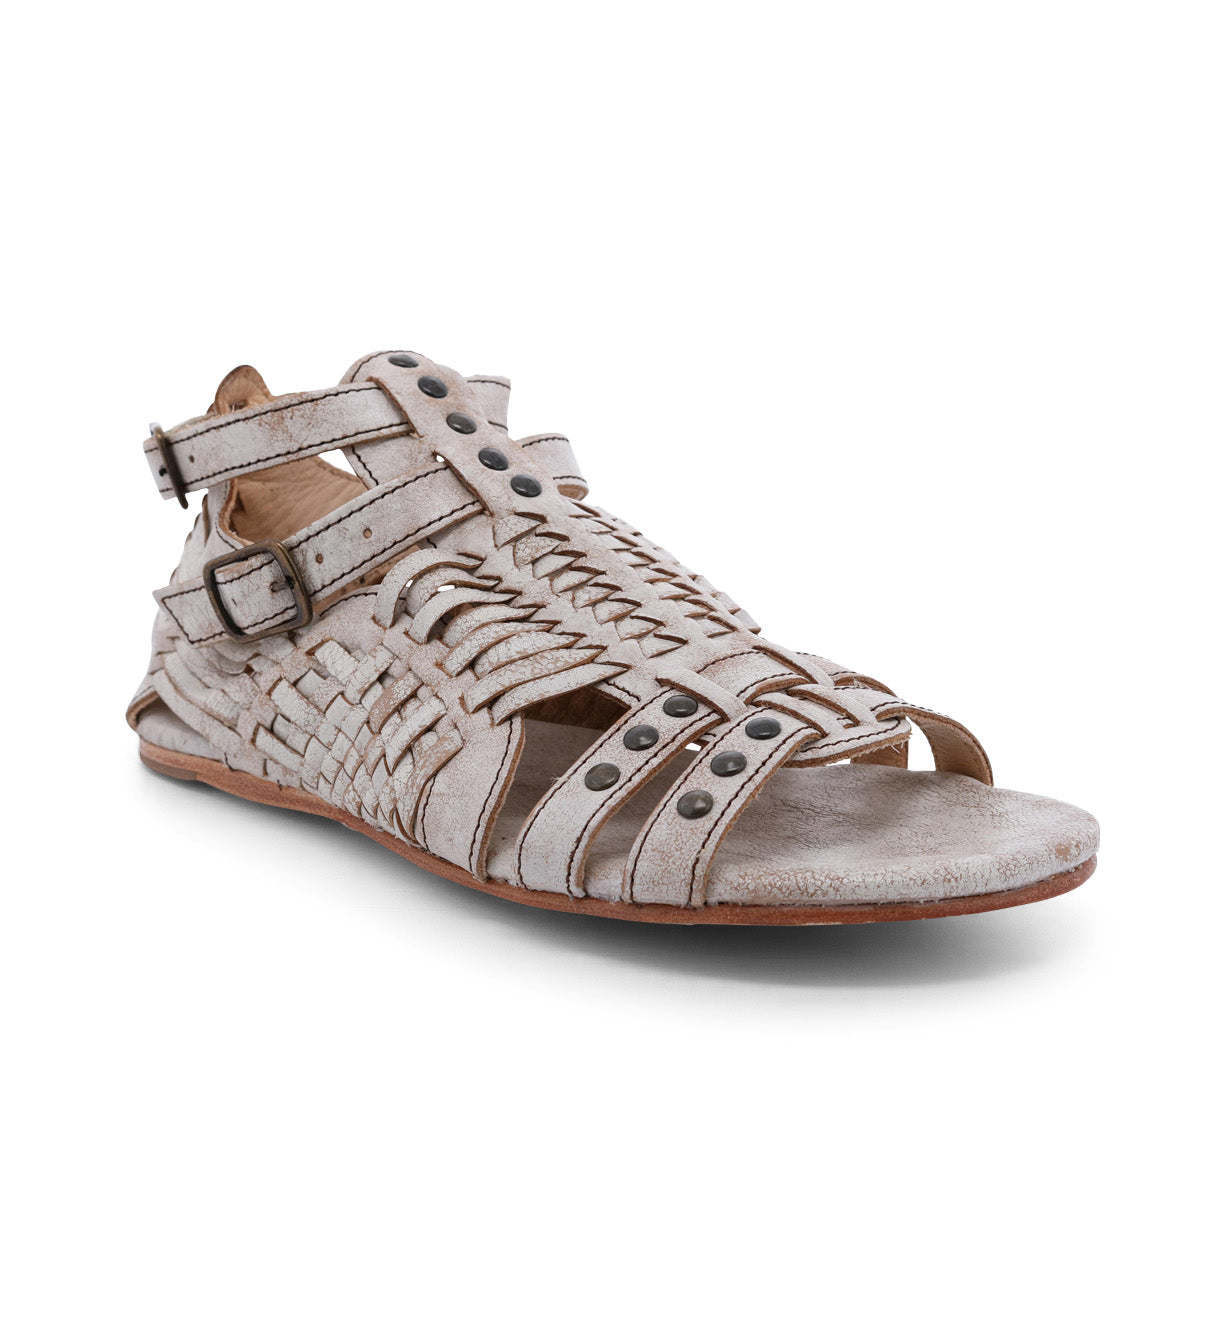 A women's sandal with braided straps and buckles called the Claire by Bed Stu.